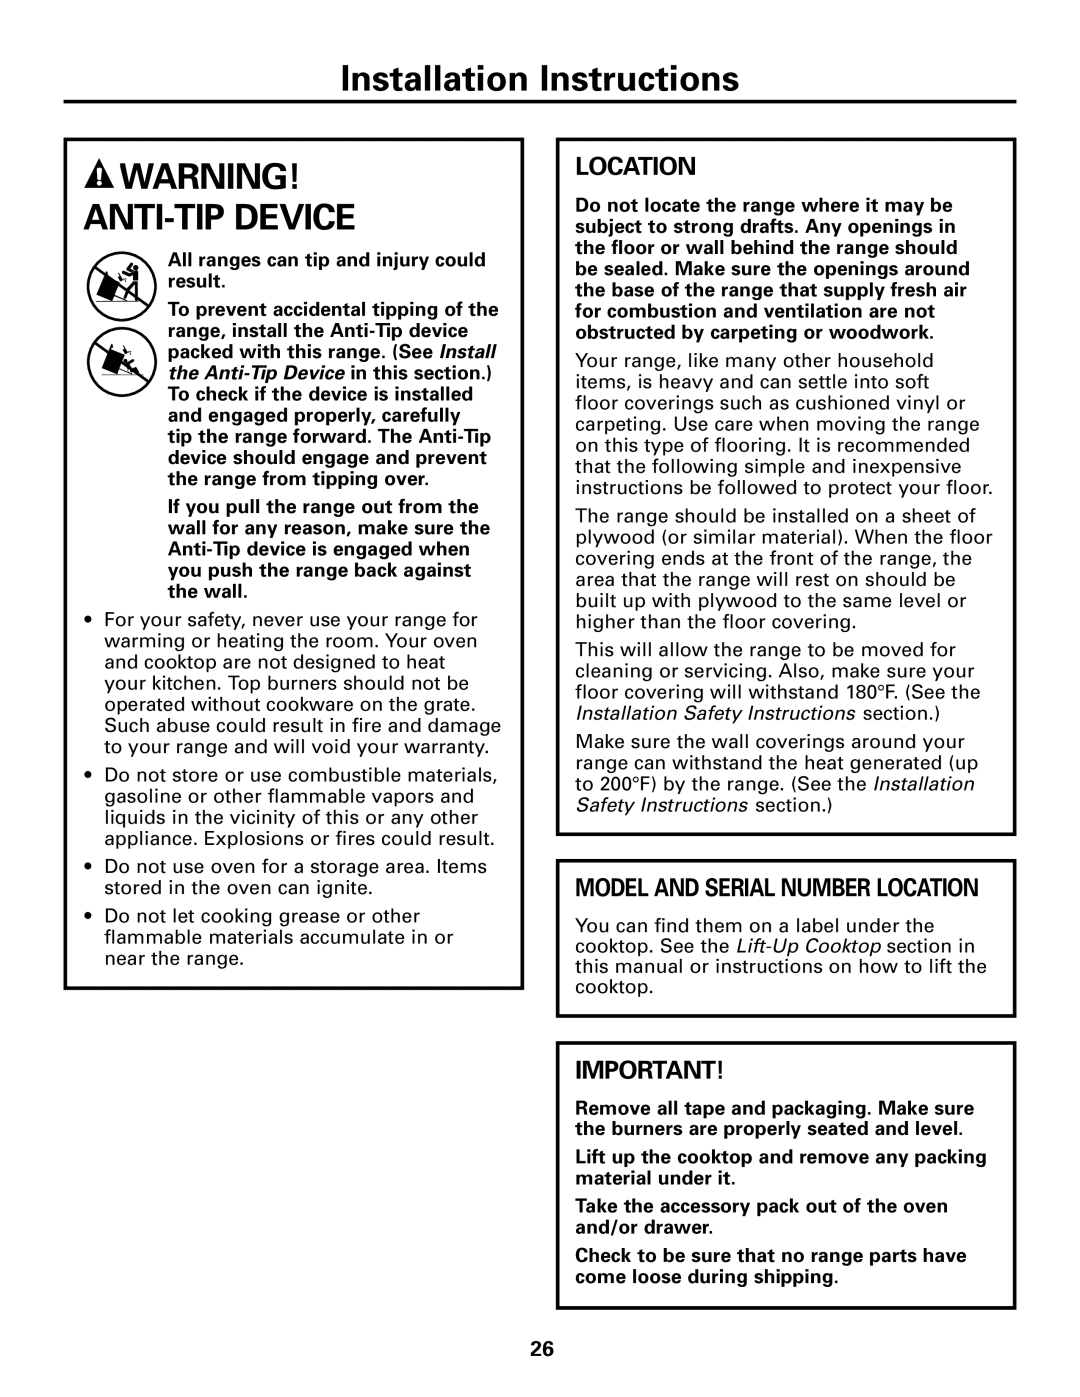 Hotpoint RGA724, RGA720 owner manual Anti-Tipdevice, Model And Serial Number Location, Installation Instructions 